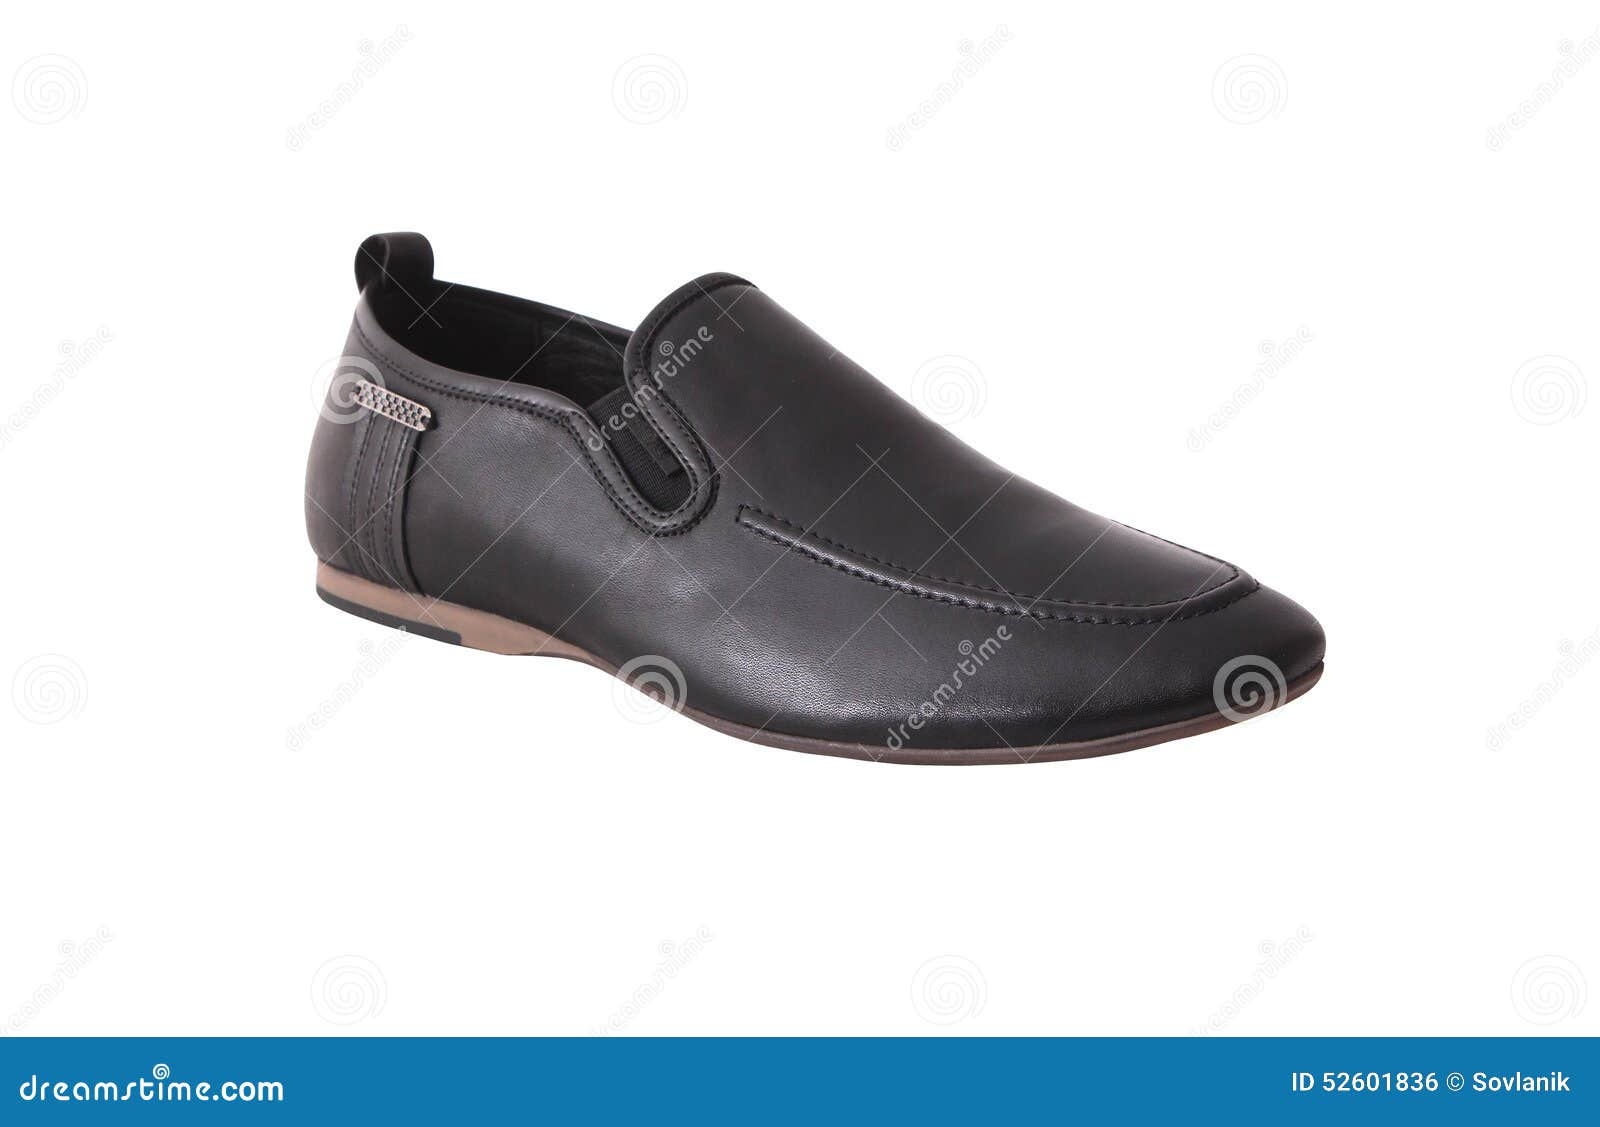 Shoes for a young man stock photo. Image of comfort, footwear - 52601836